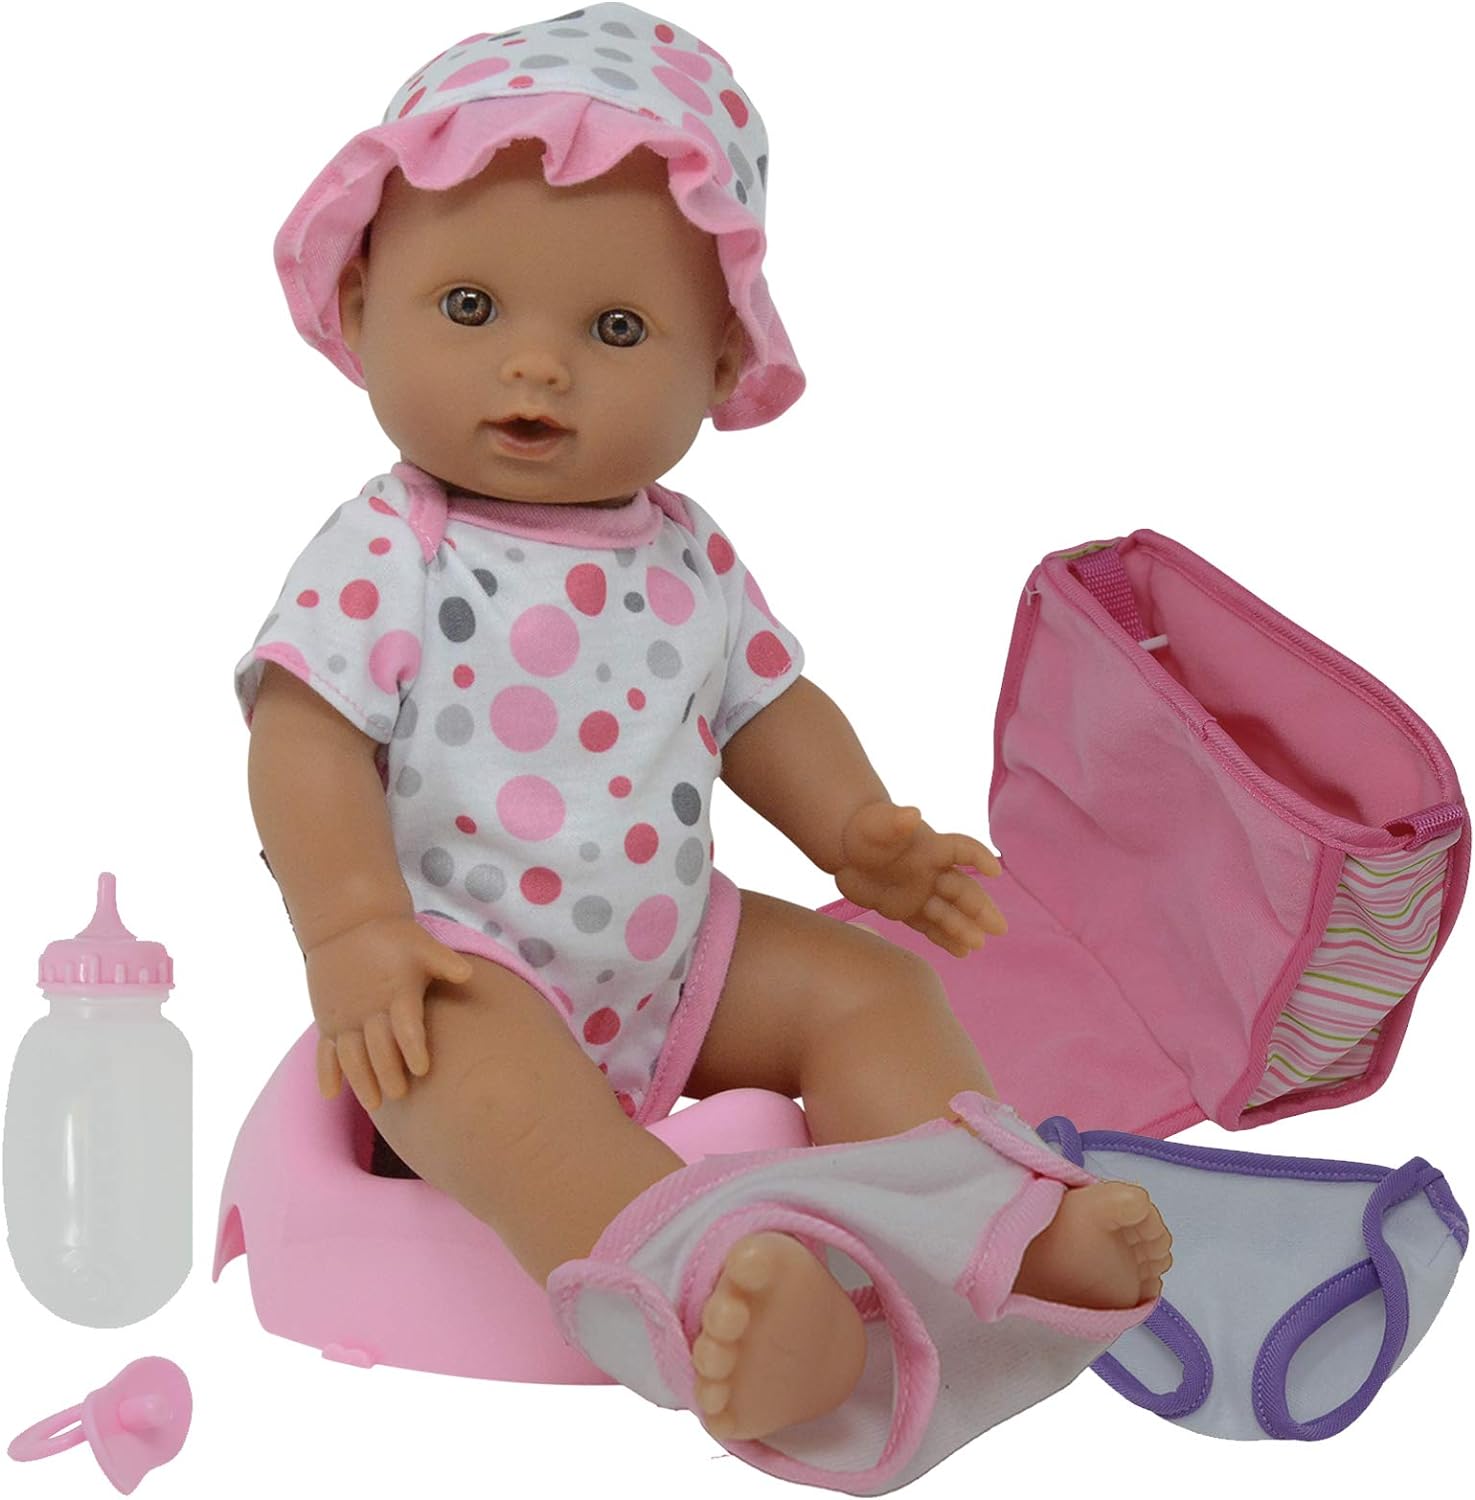 potty training baby dolls Drink and wet potty training baby doll posable dolls with pacifier